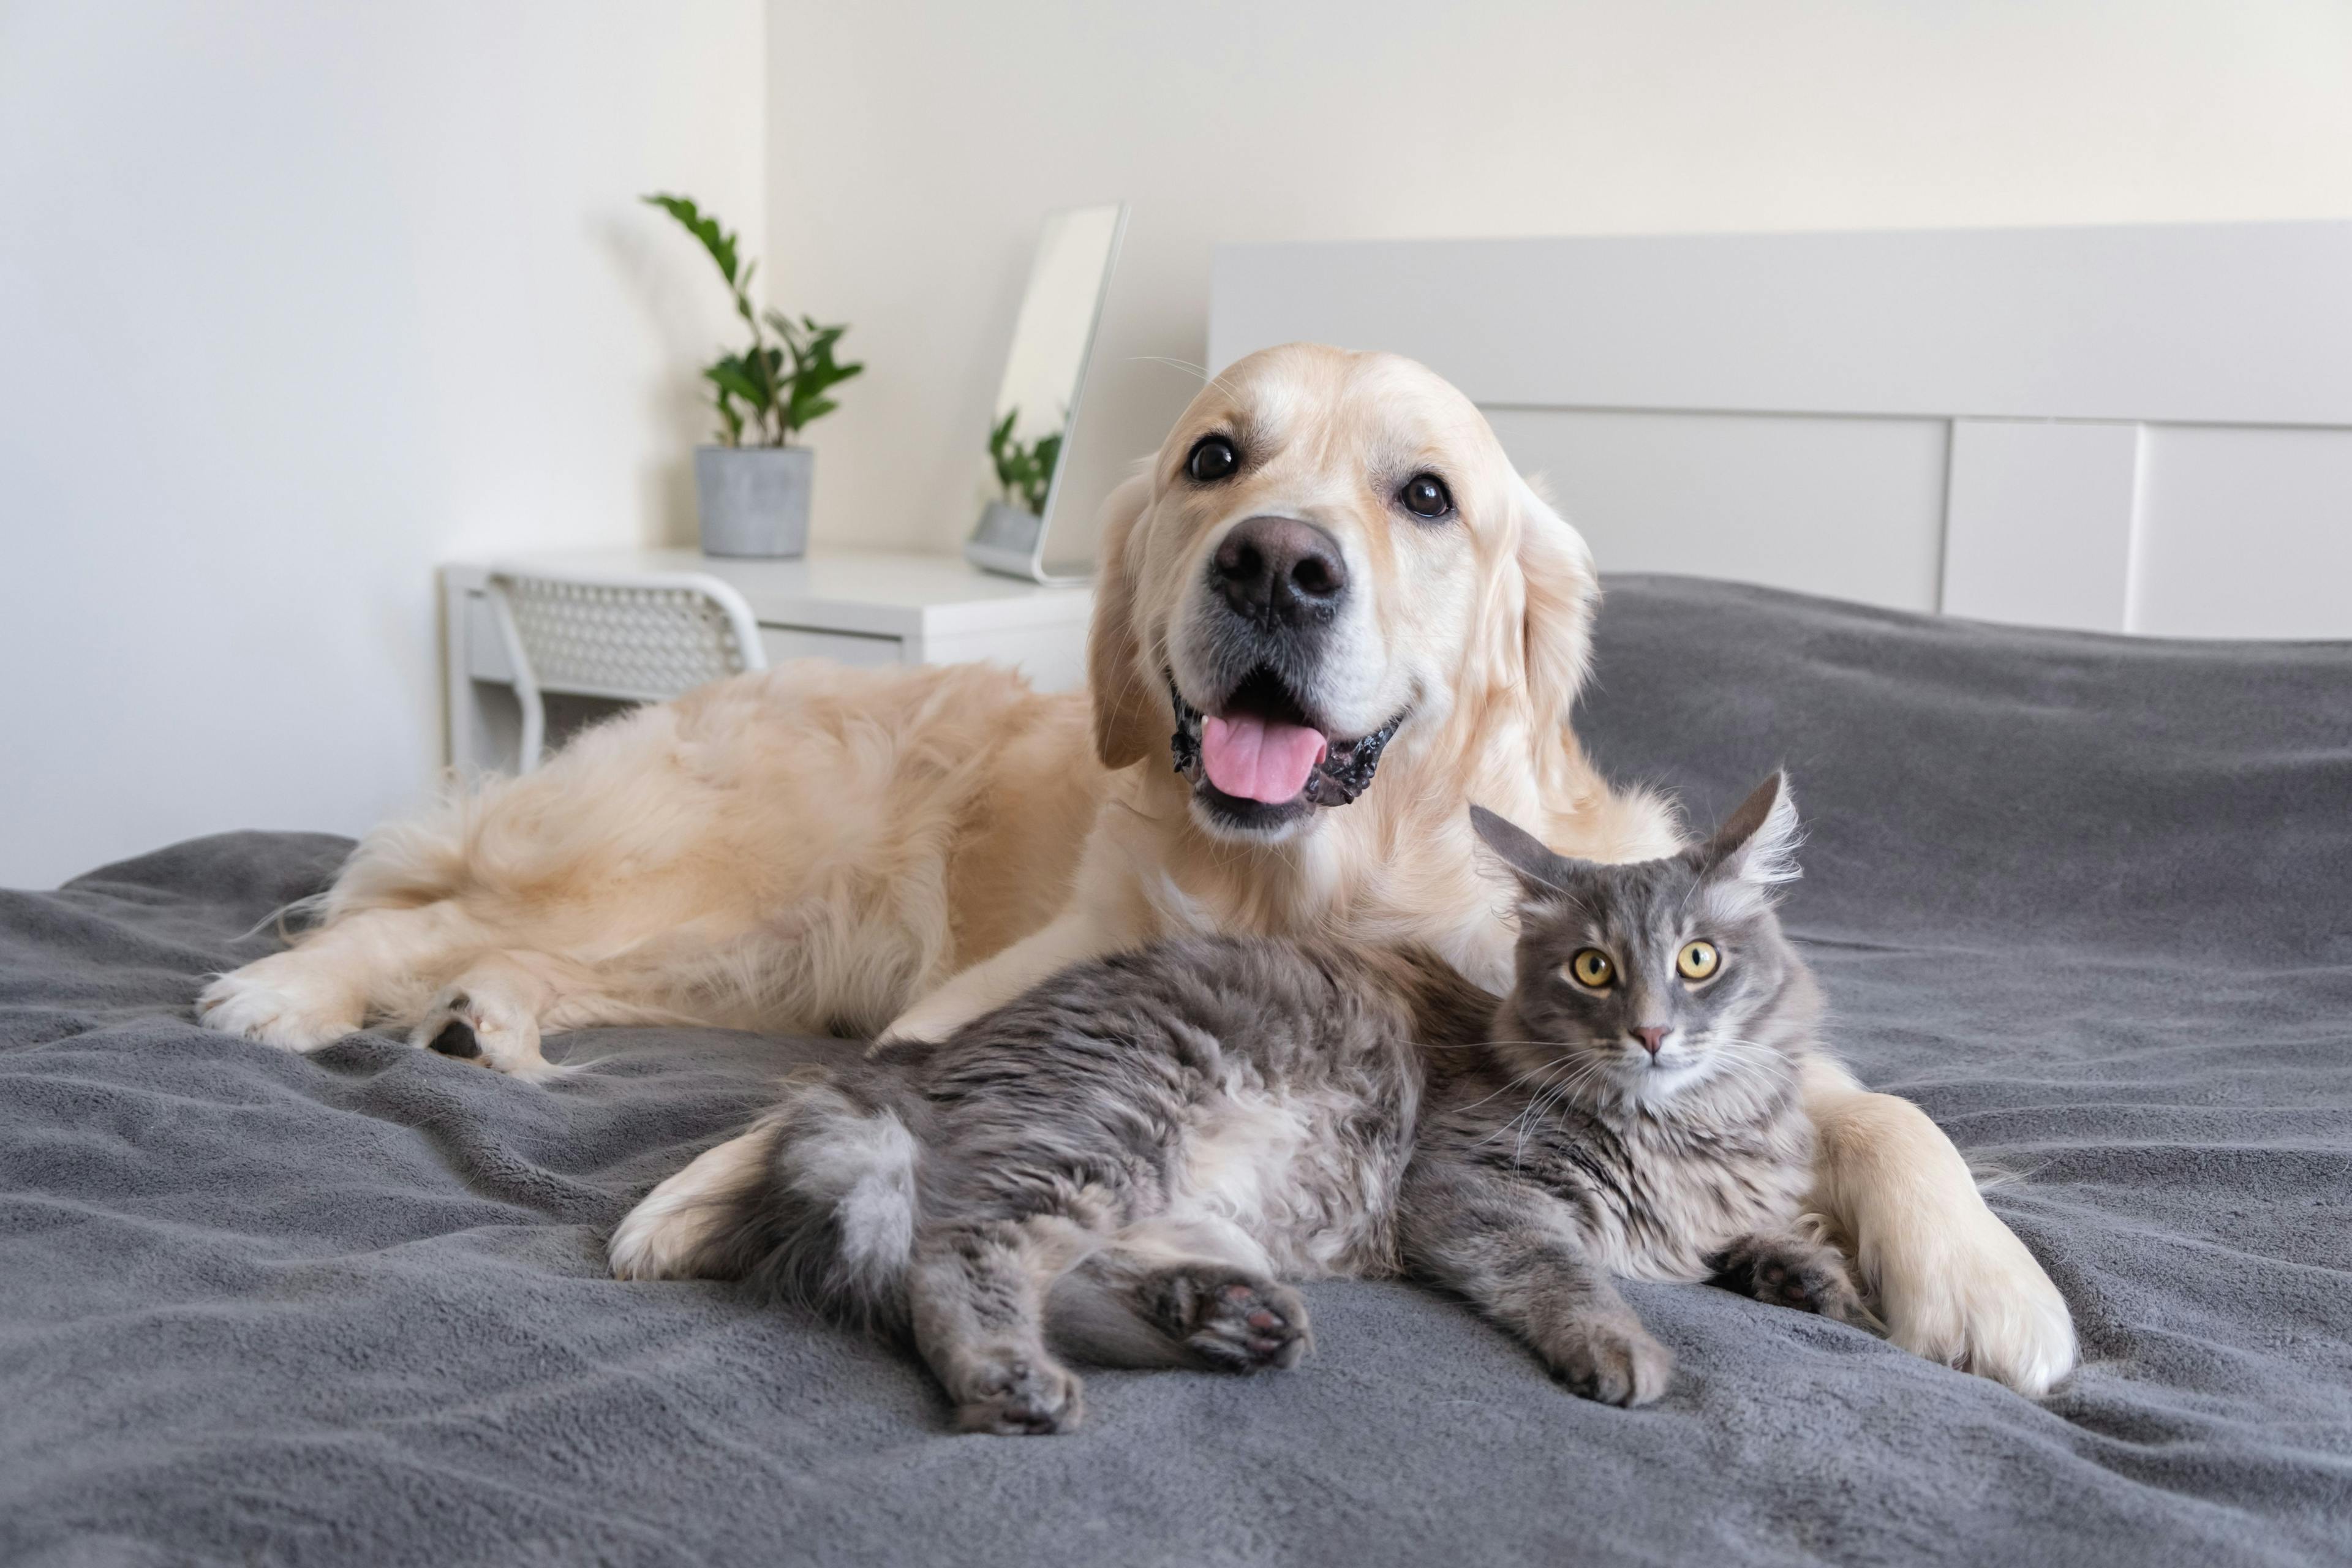 Prevention and treatment of dermatologic fungal disease in dogs and cats